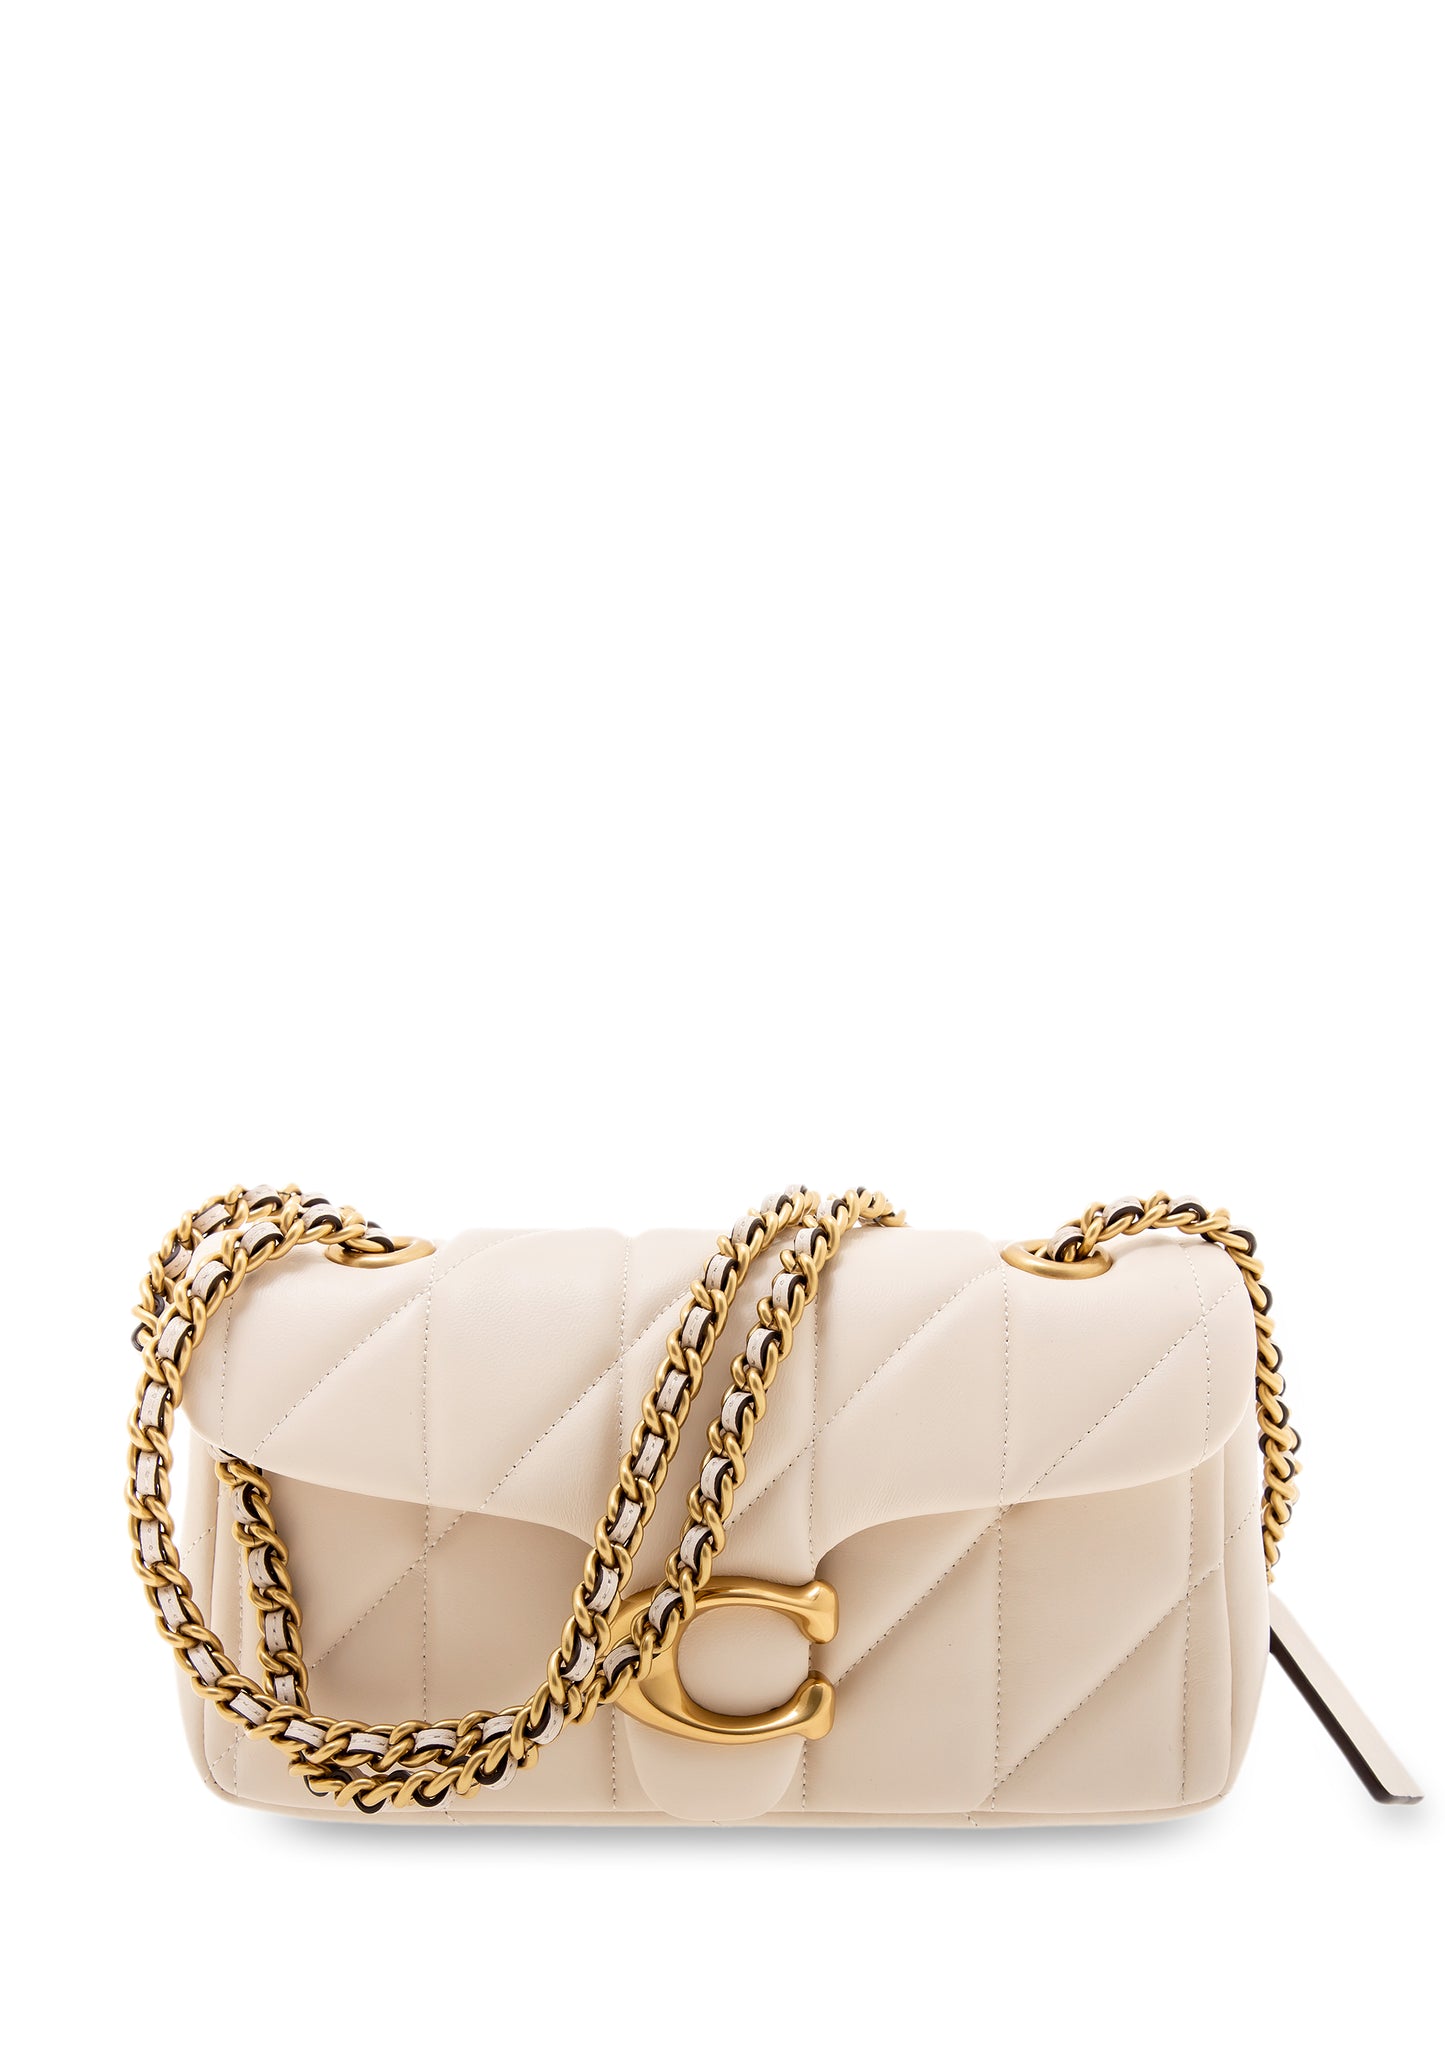 Tabby Quilted Shoulder Bag with Chain ch | Bildmaterial bereitgestellt von SHOES.PLEASE.